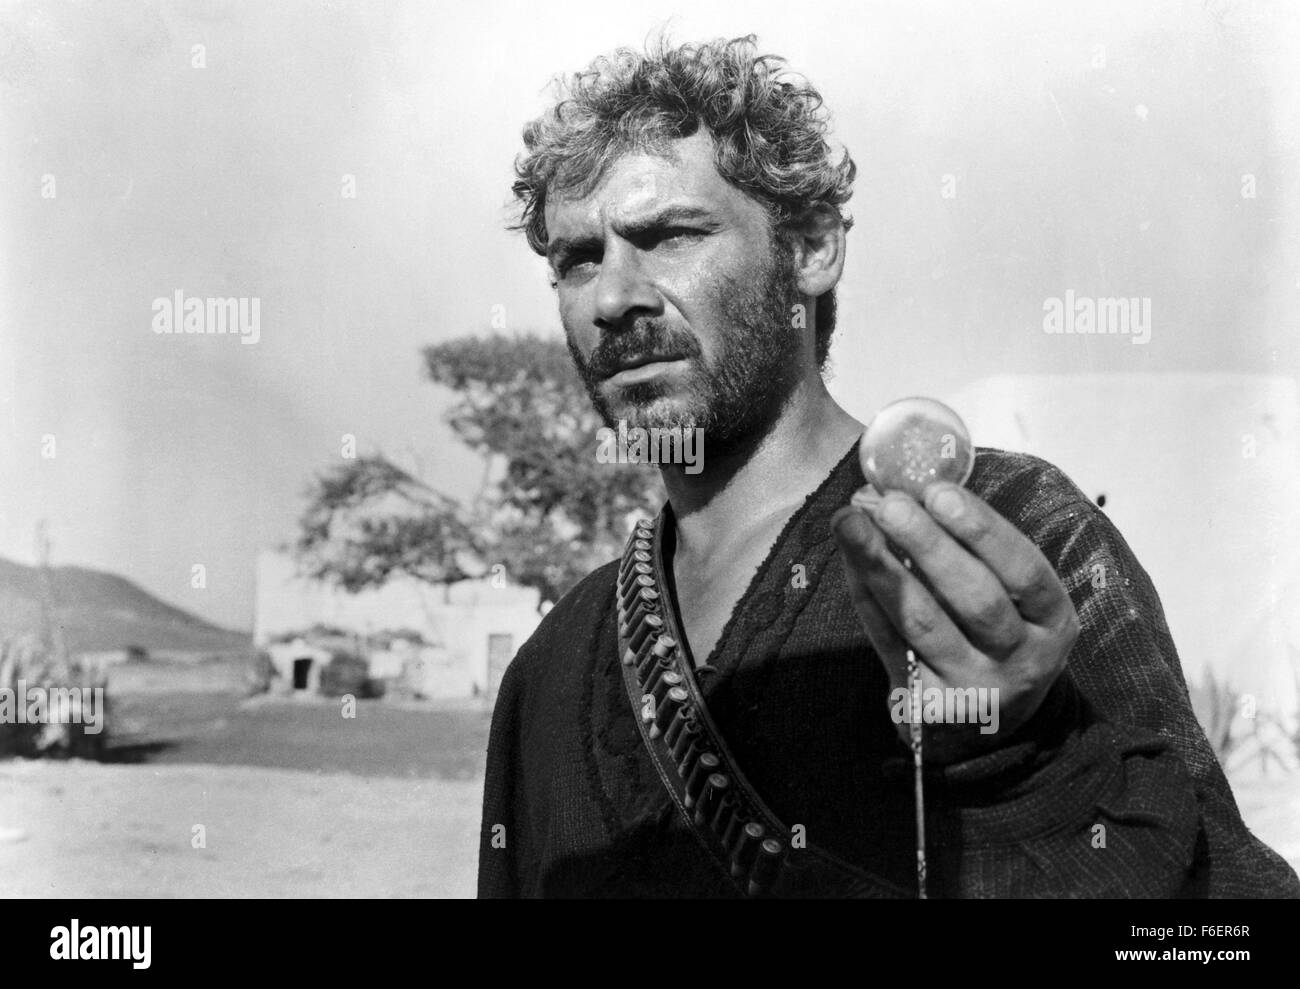 Dec 18, 1965; Madrid, SPAIN; GIAN MARIA VOLONTE as El Indio in the action,  western, drama film 'For a Few Dollars More' directed by Sergio Leone Stock  Photo - Alamy